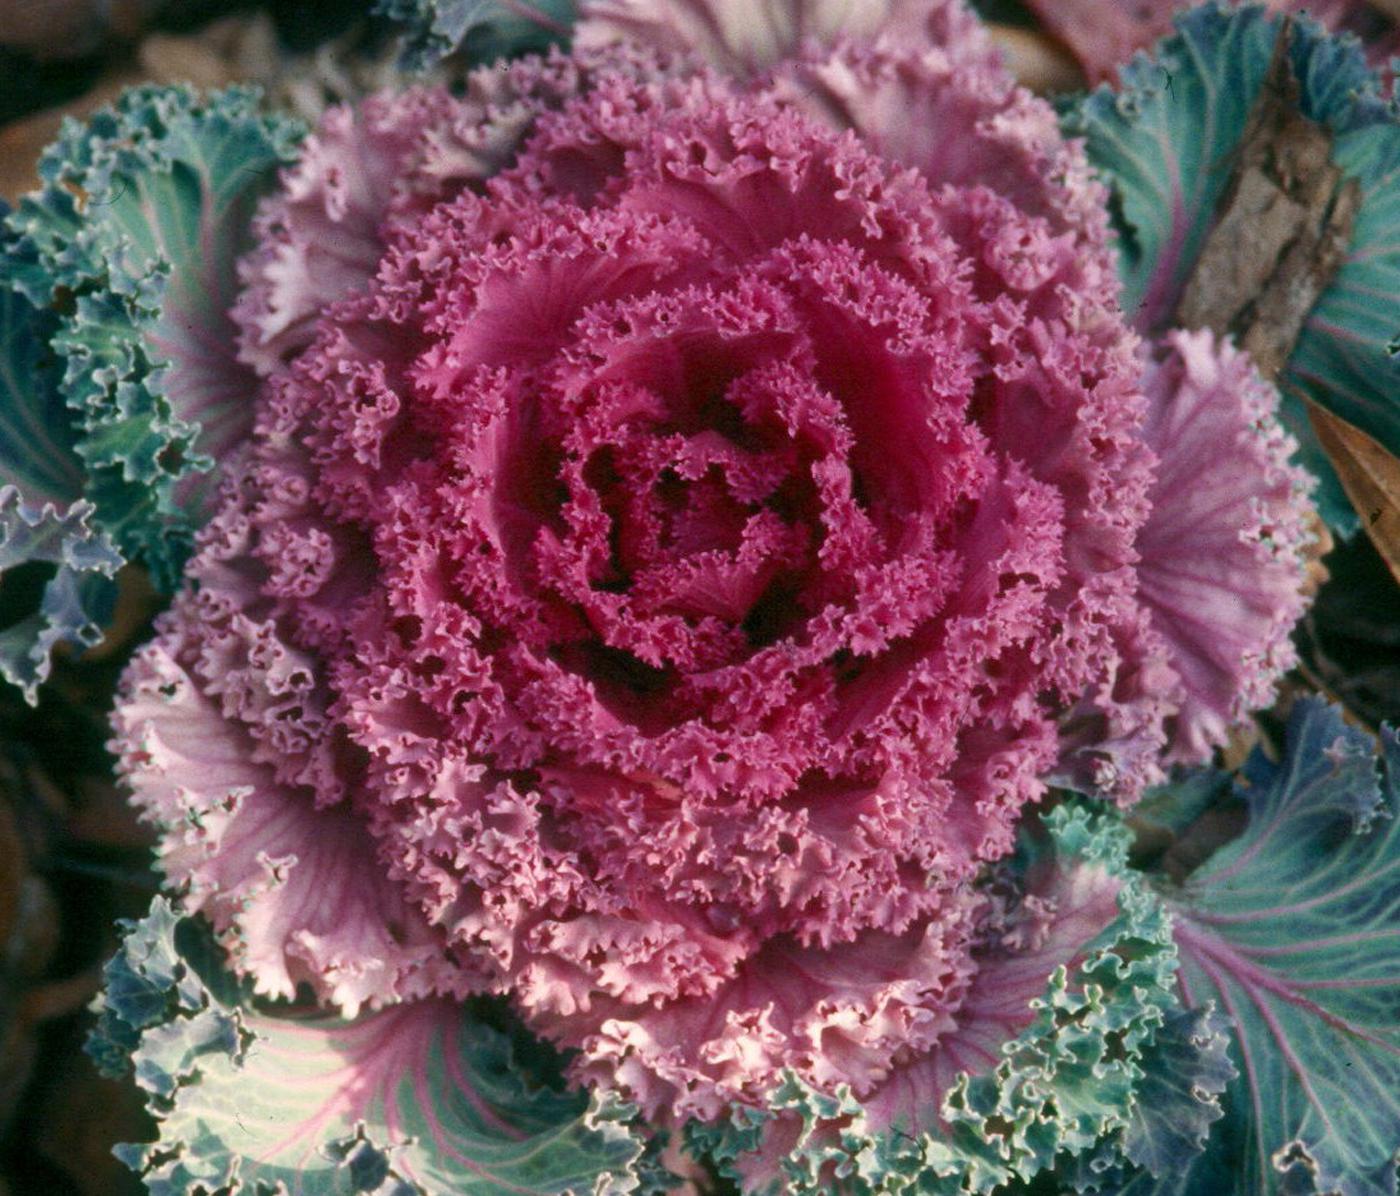 Flowering kale and cabbage are not eaten, but the leaves do make very decorative garnishes for holiday feasts.